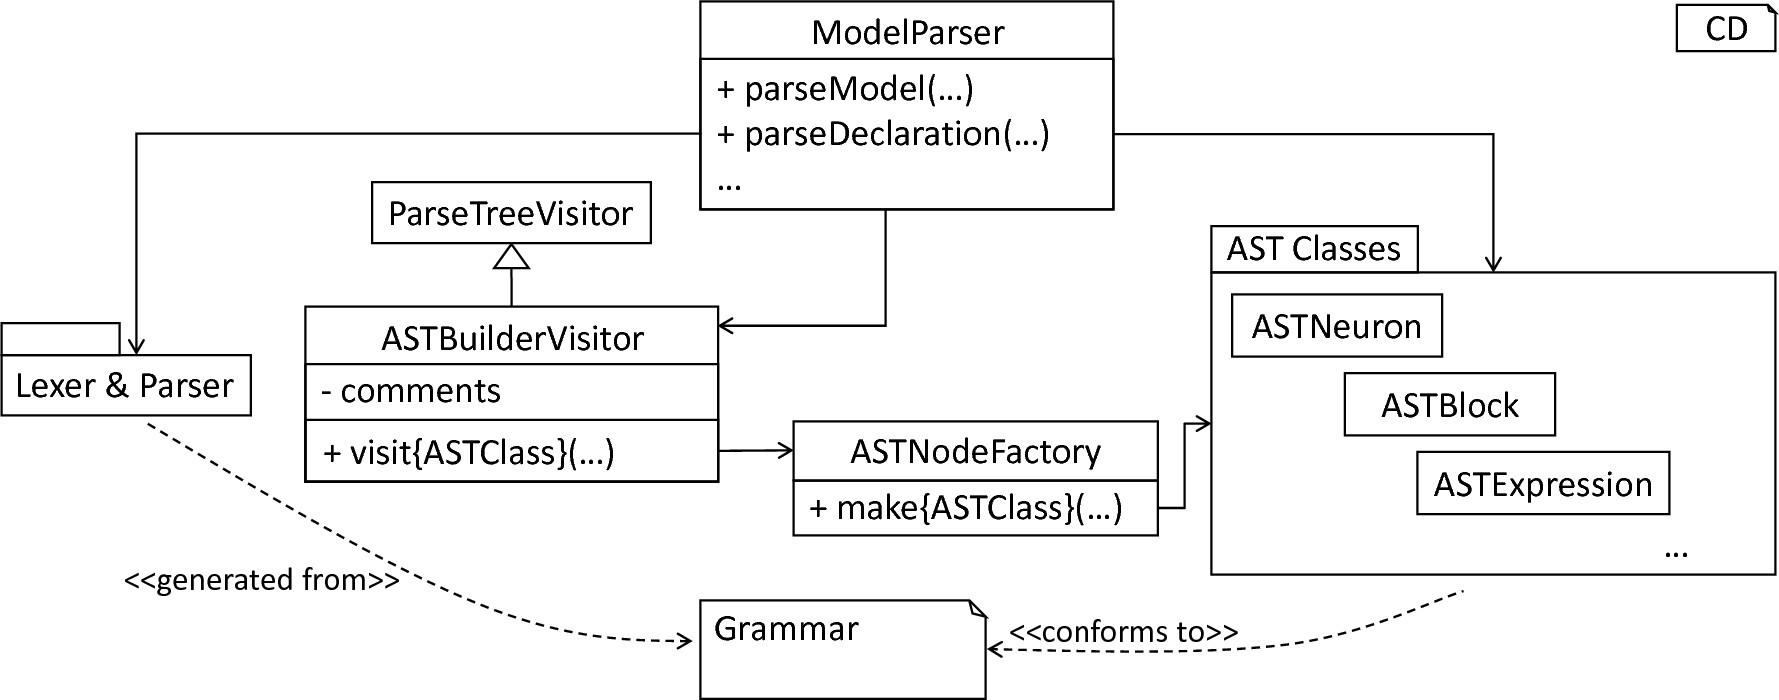 Overview of the lexer, parser and the AST classes